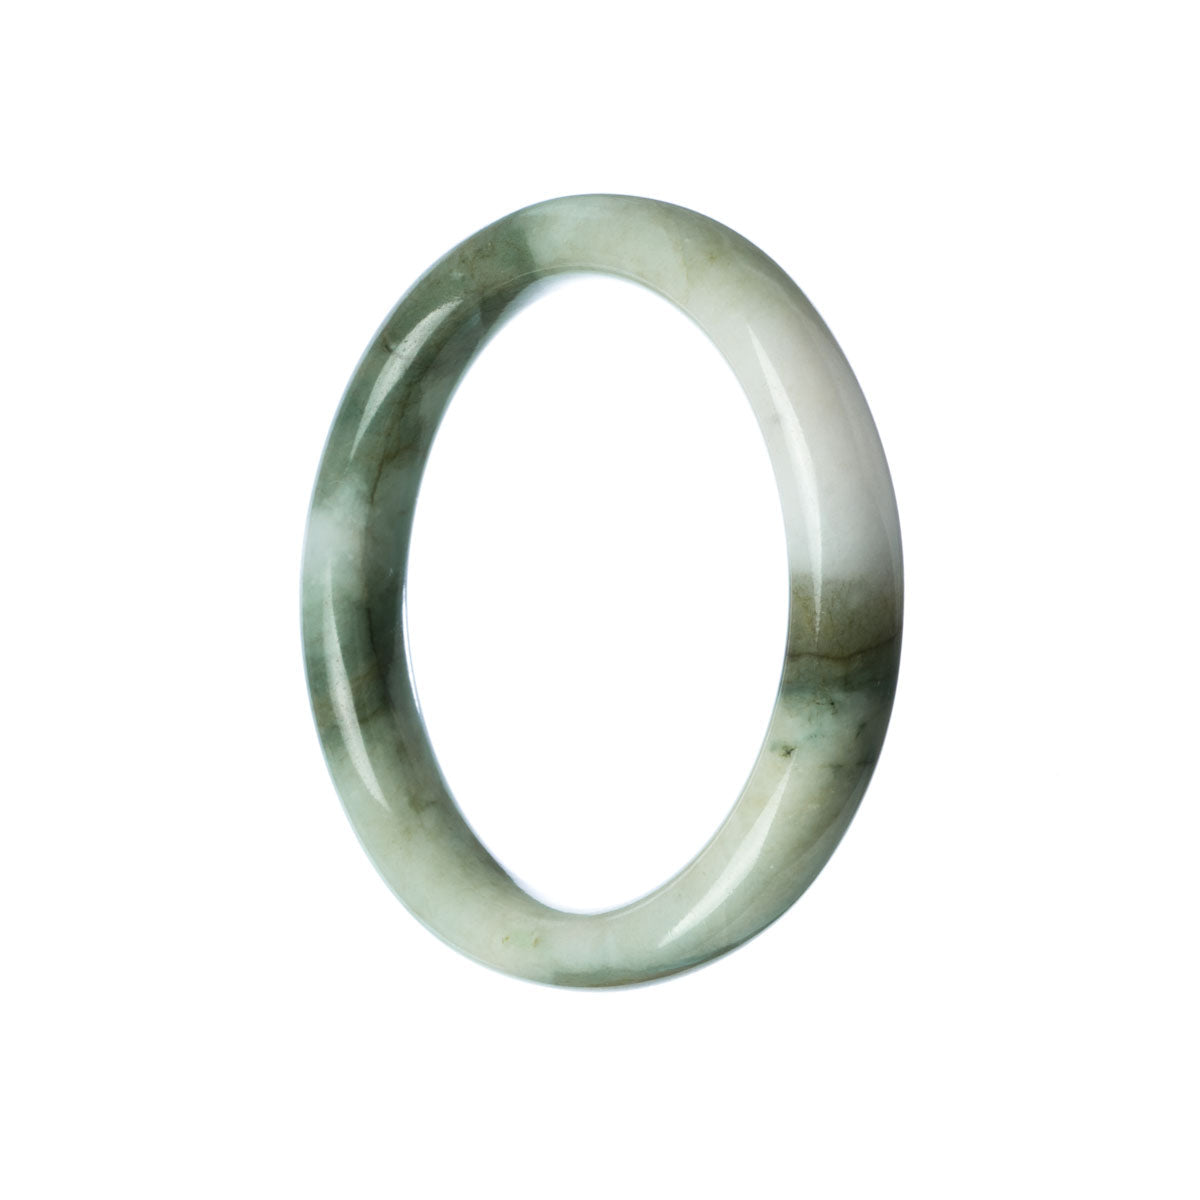 A white and green traditional jade bracelet made of genuine untreated jade. The bracelet is semi-round in shape and measures 56mm. Crafted by MAYS™.